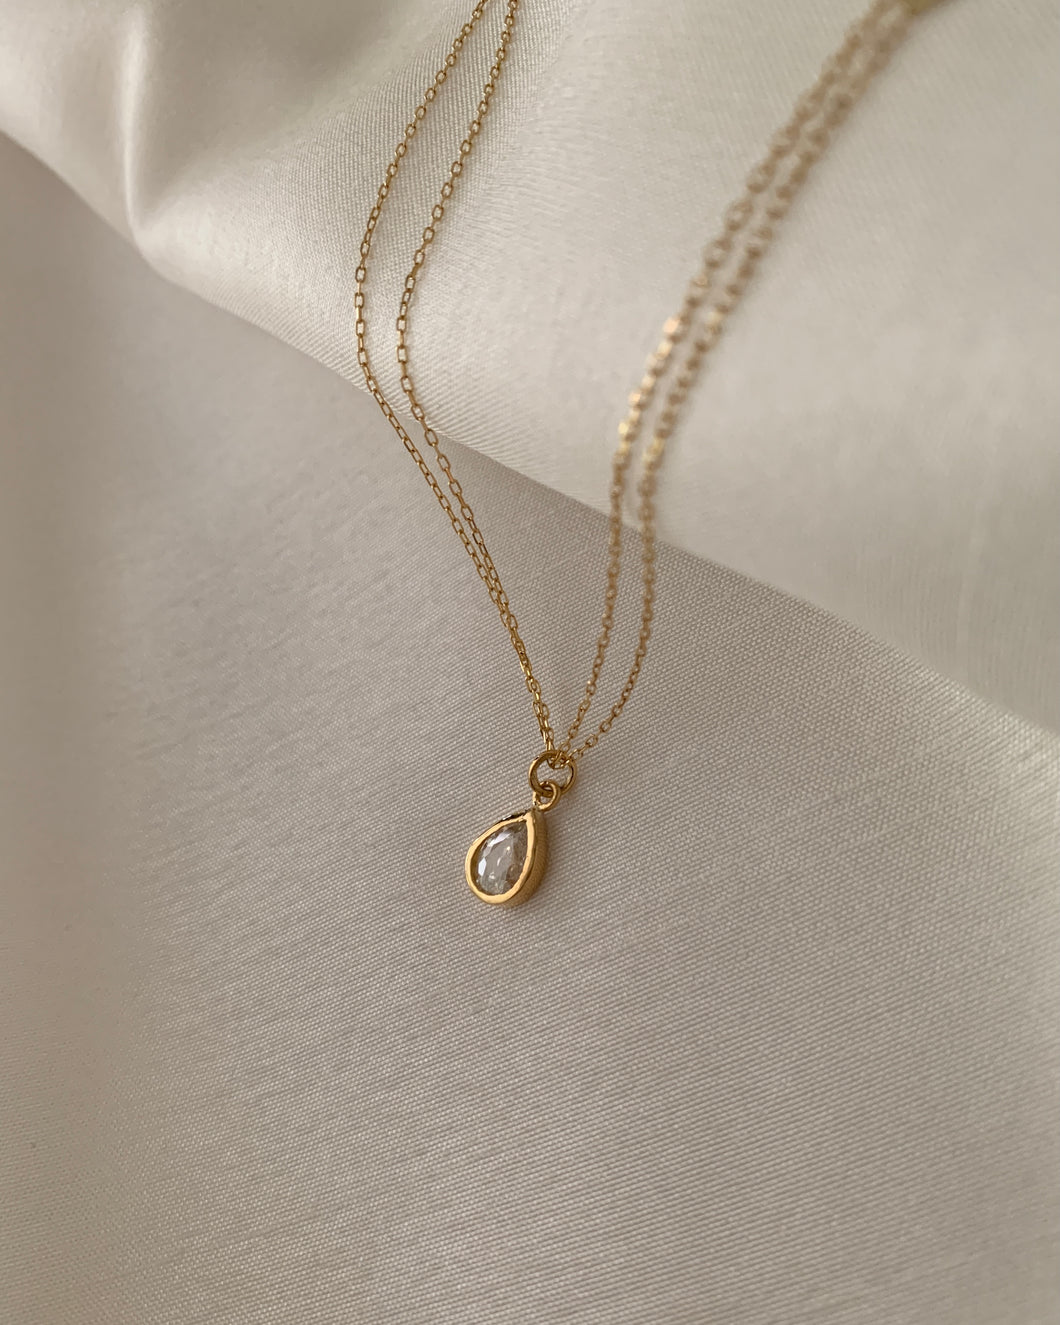 A pear-shaped diamond out into a yellow gold bezel setting necklace.